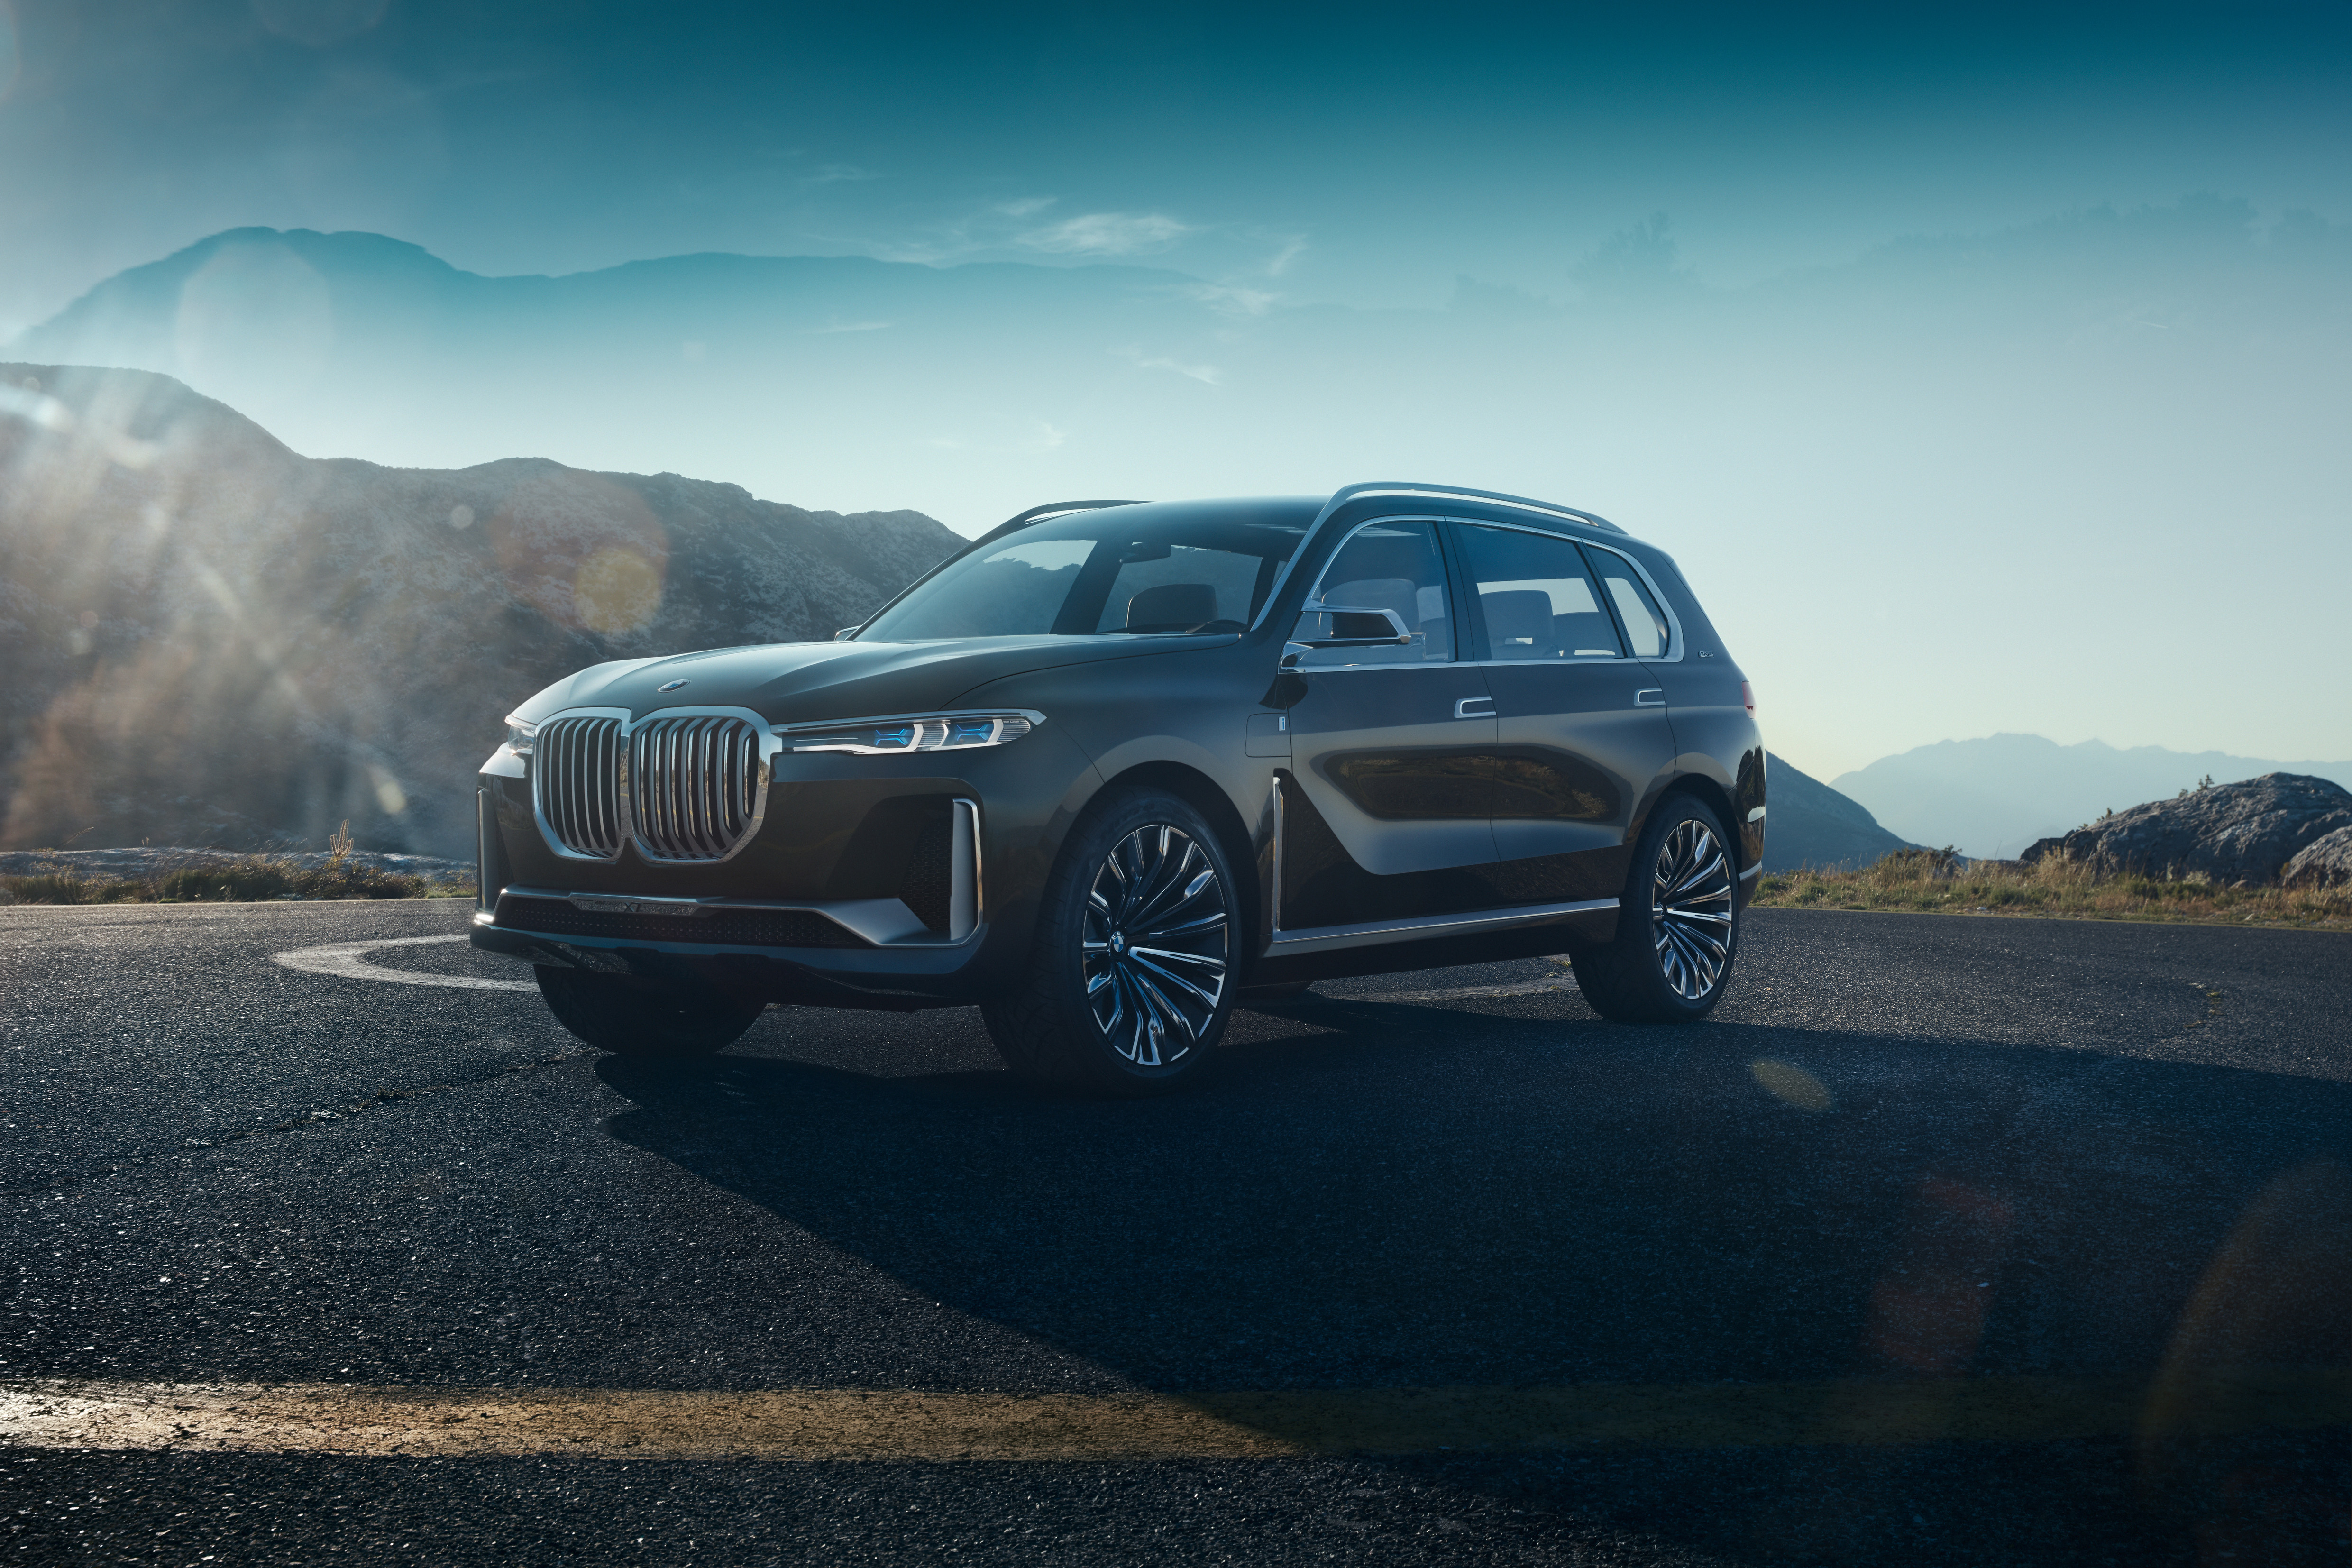 BMW Concept X7 iPerformance. A new dimension in spaciousness